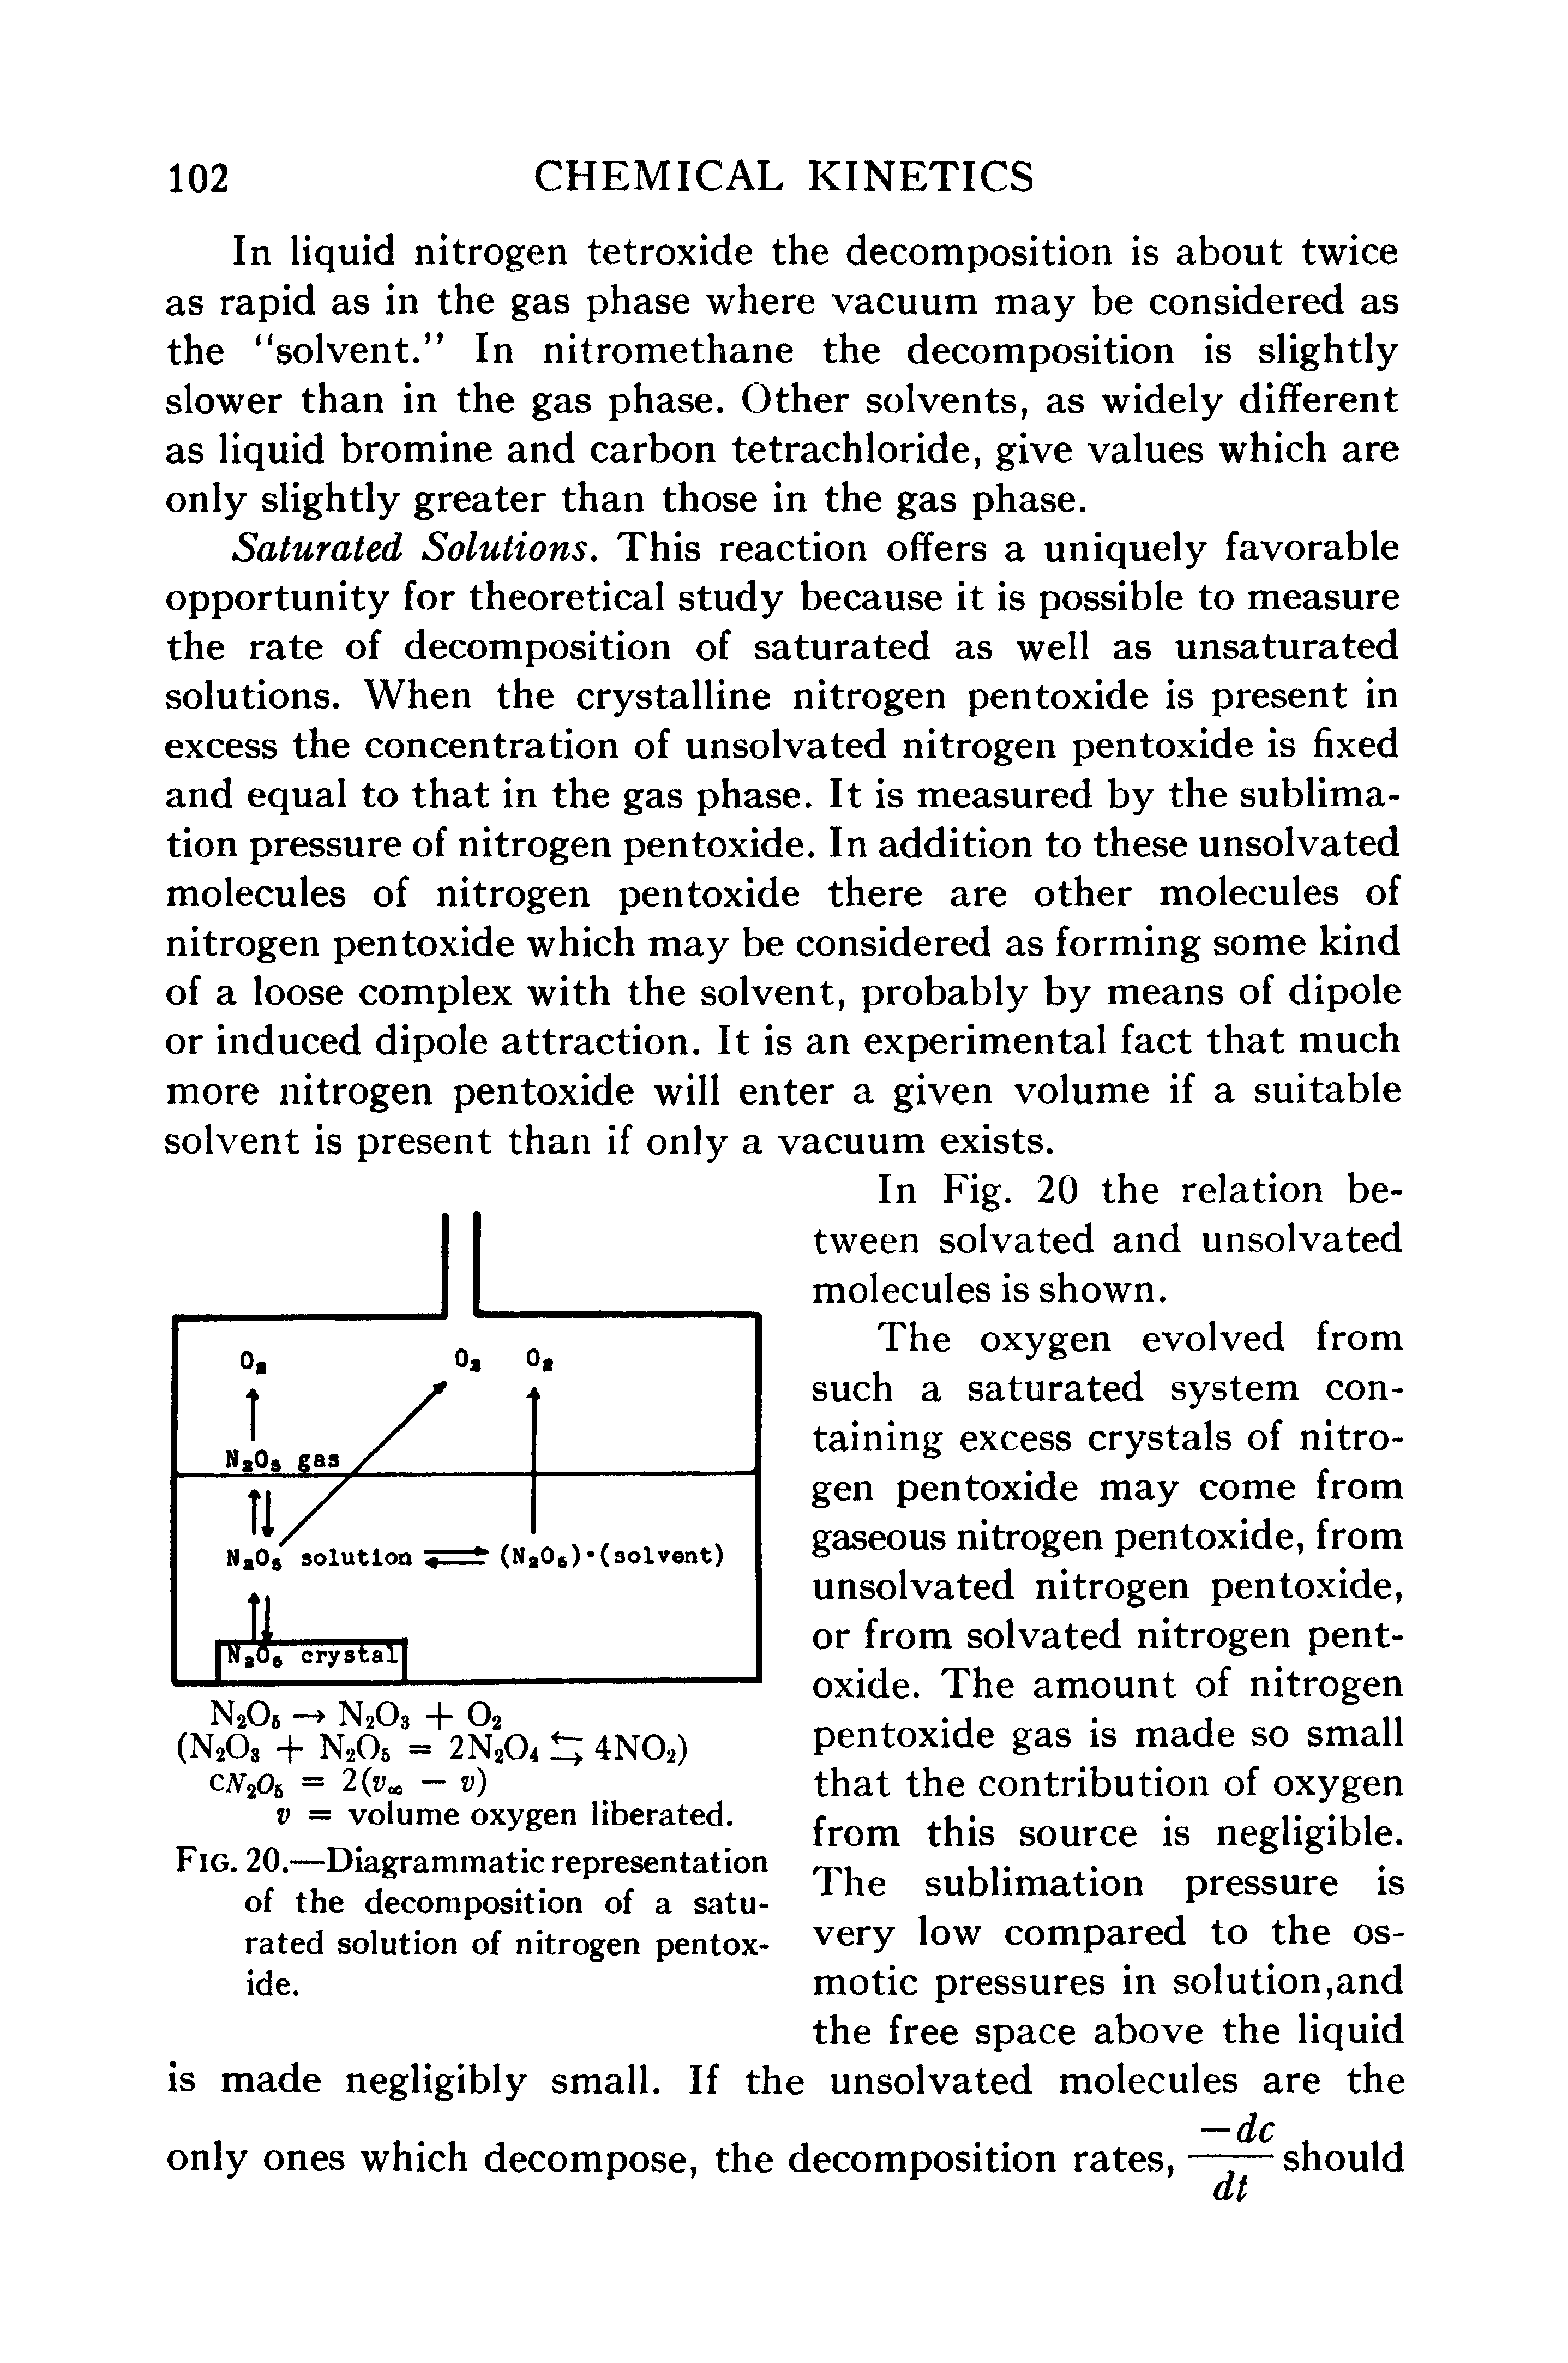 Fig. 20.—Diagrammatic representation of the decomposition of a saturated solution of nitrogen pentoxide.